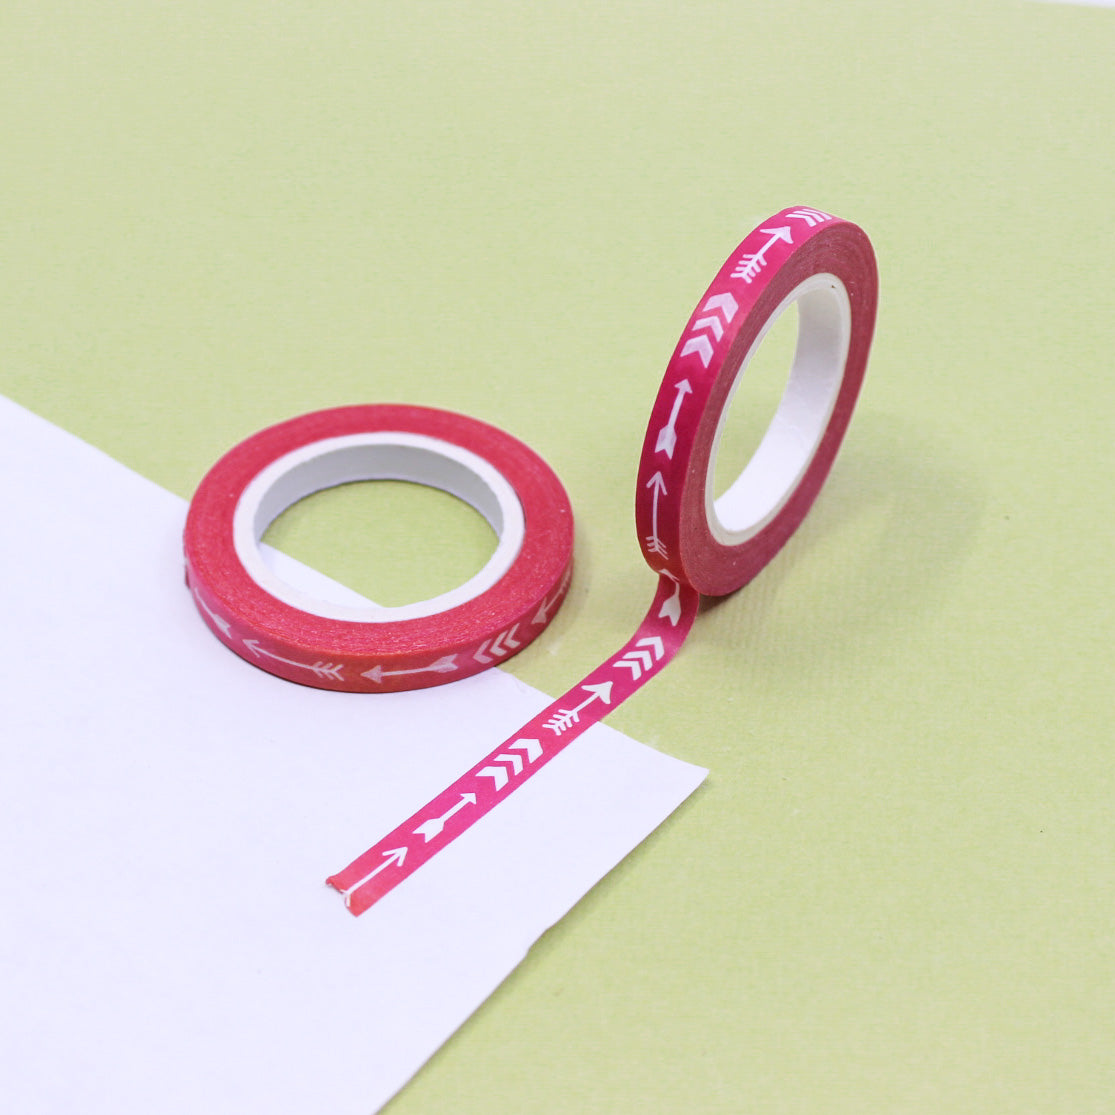 Enhance your crafts with our Narrow Pink Arrow Washi Tape, featuring a sleek and stylish arrow pattern in a vibrant shade of pink. Perfect for adding a contemporary and decorative touch to your projects. This tape is sold at BBB Supplies Craft Shop.